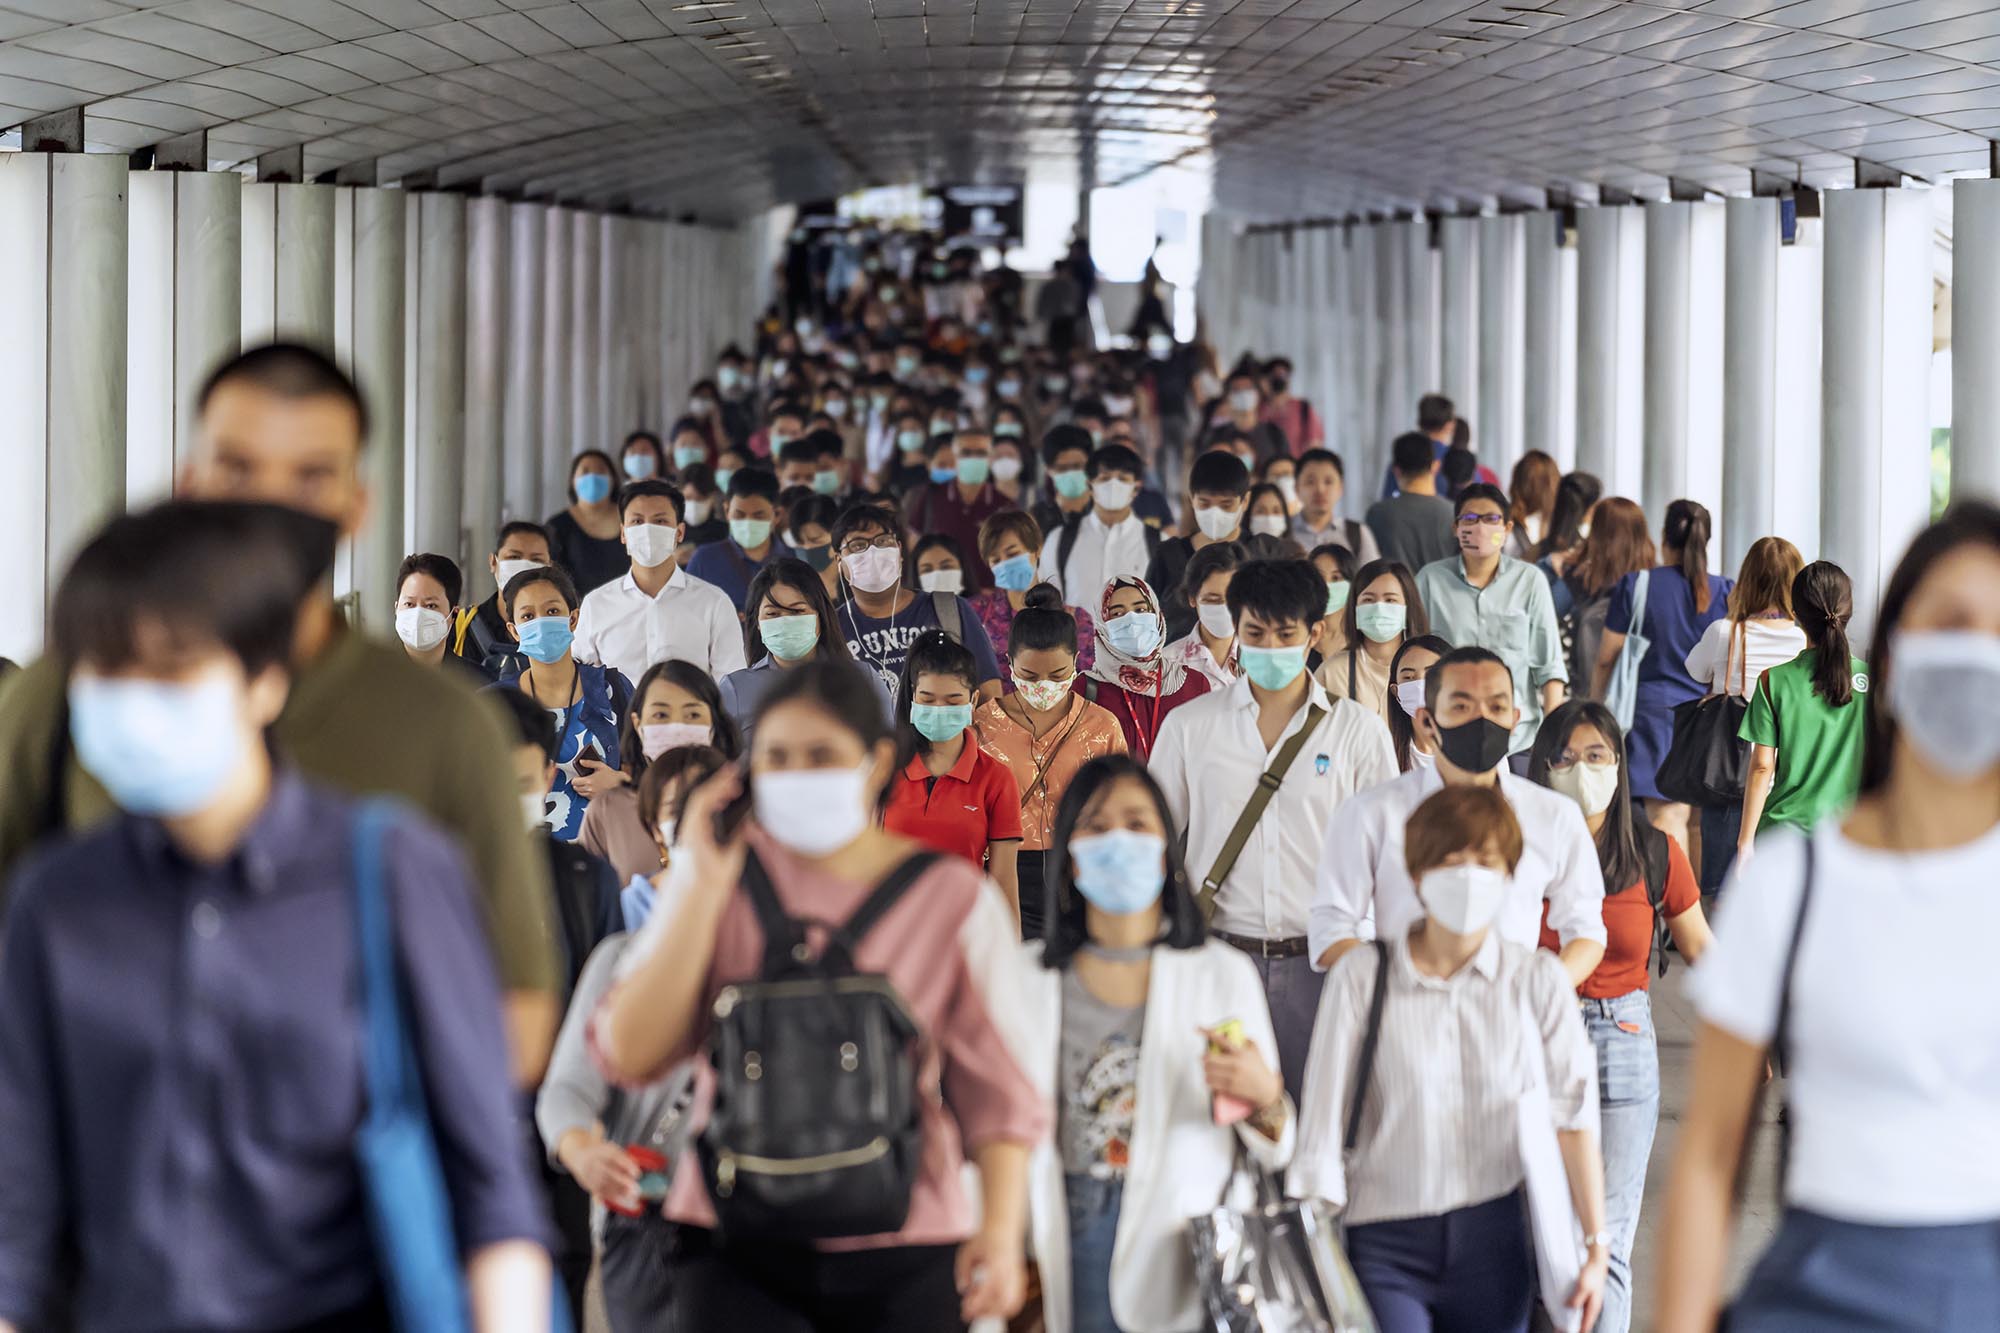 Hallway filled with people wearing masks walking